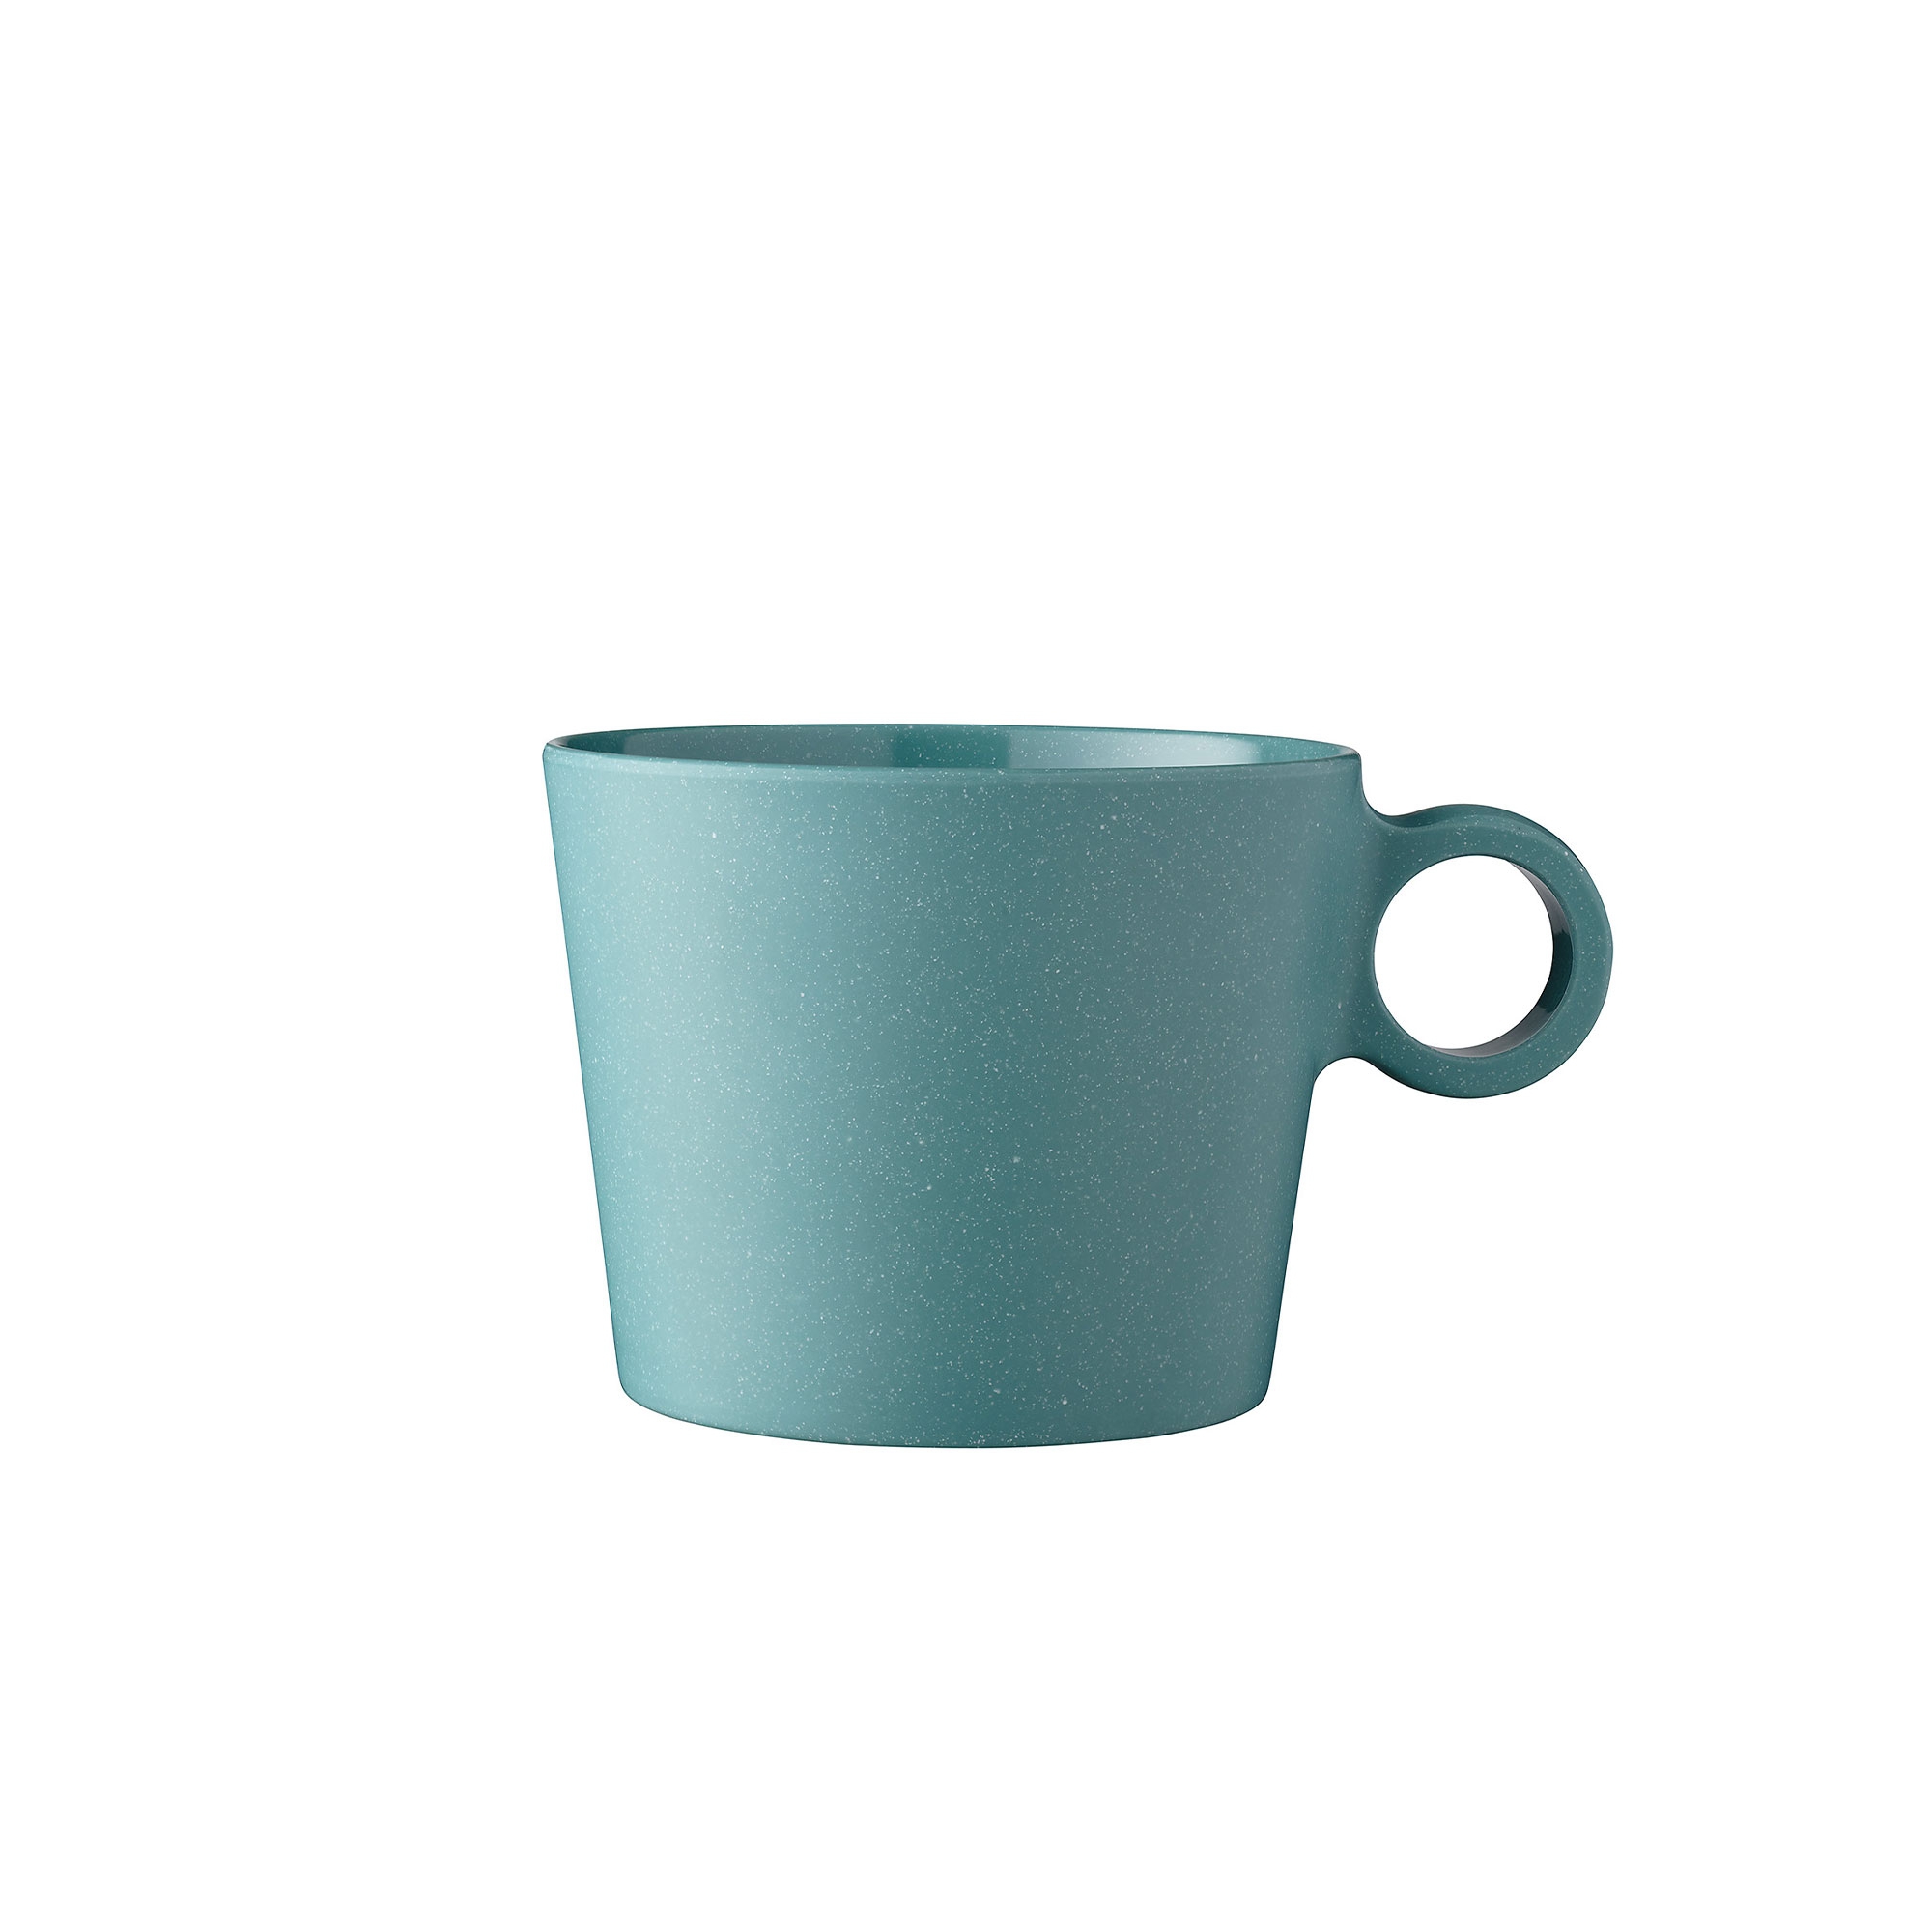 Mepal - Bloom cappuccino cup 375ml - various colors